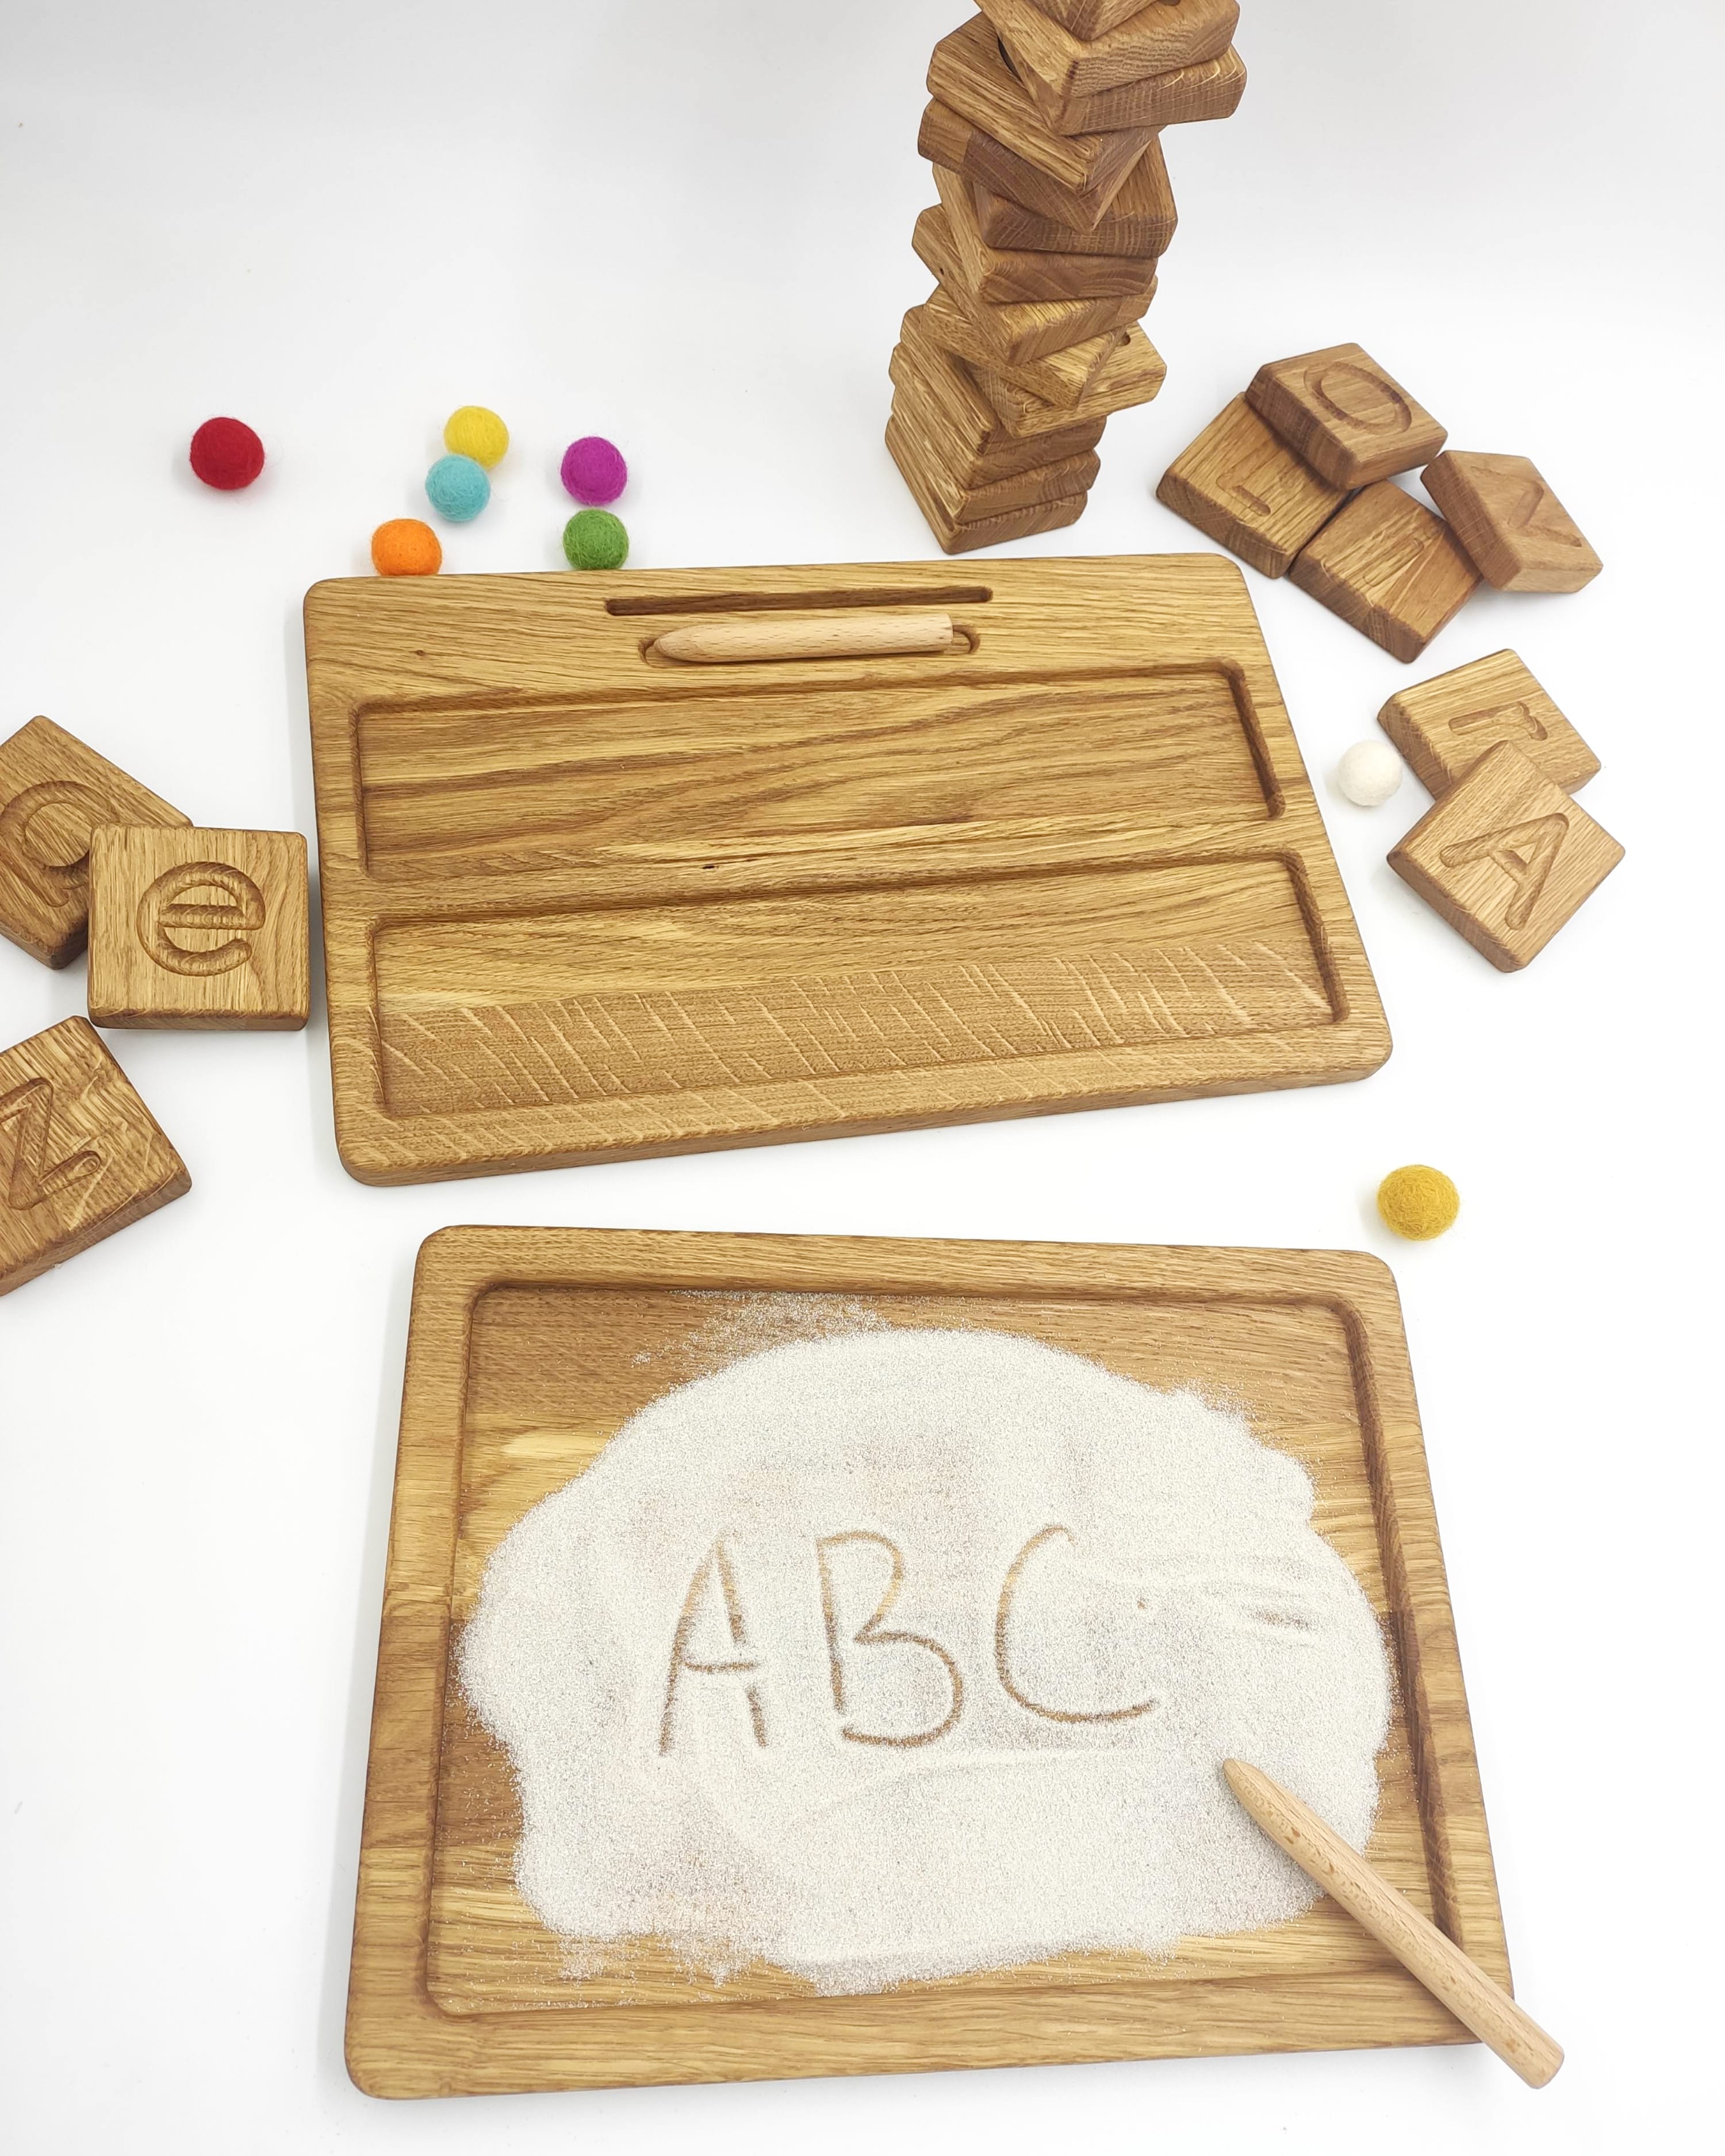 Montessori reversible A/a letters blocks or cards with sand tray